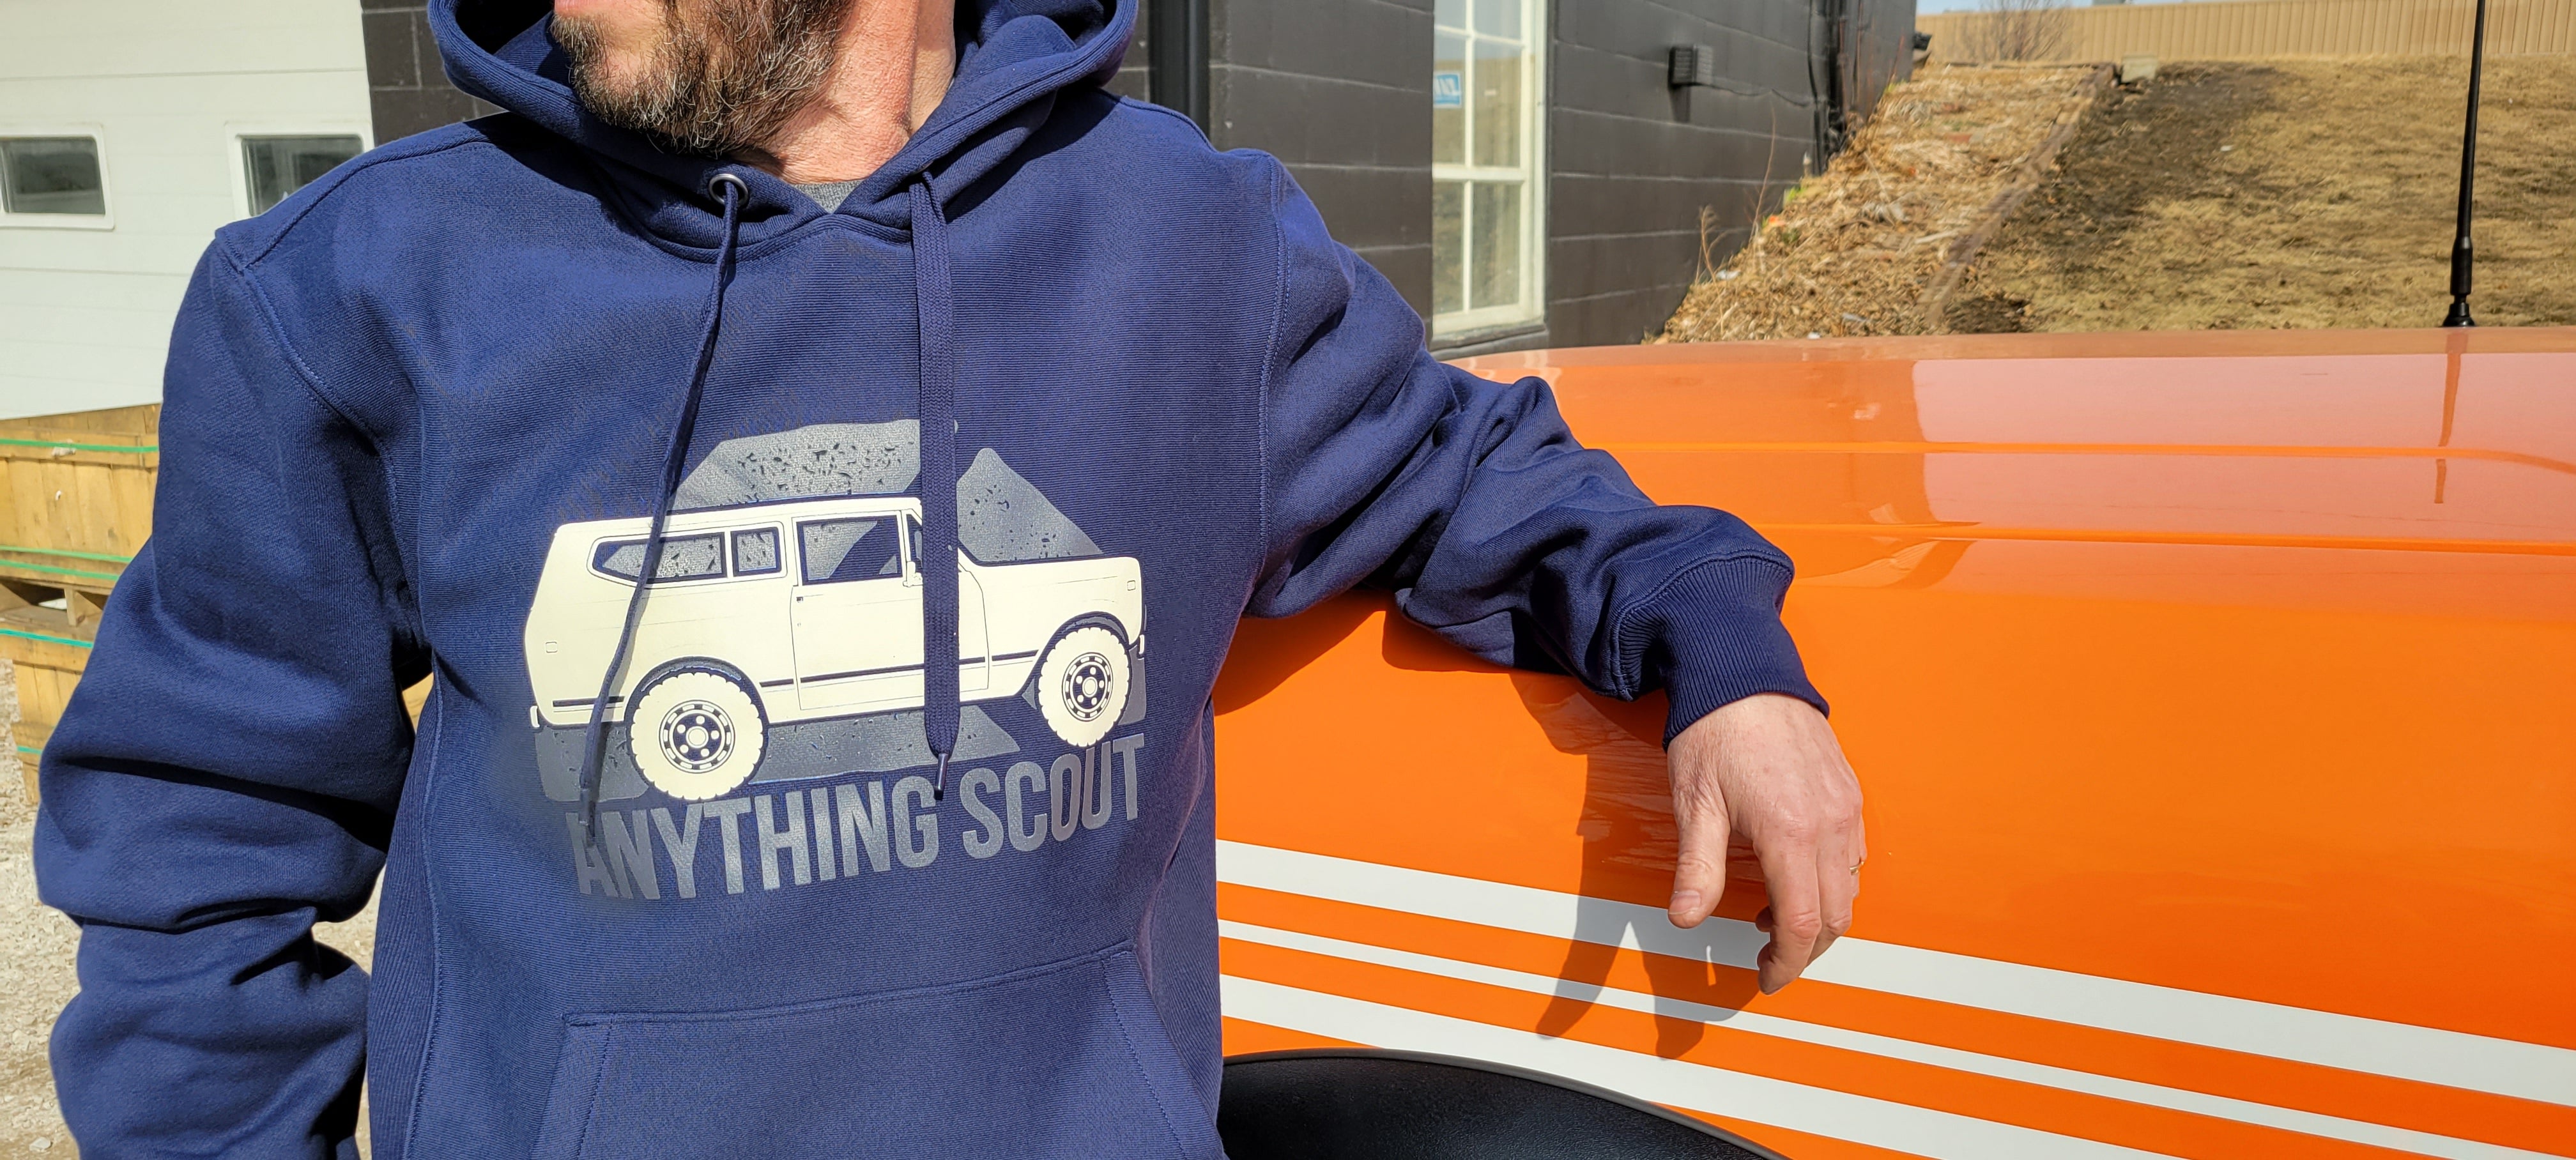 Anything Scout Heavy Duty Hoodie